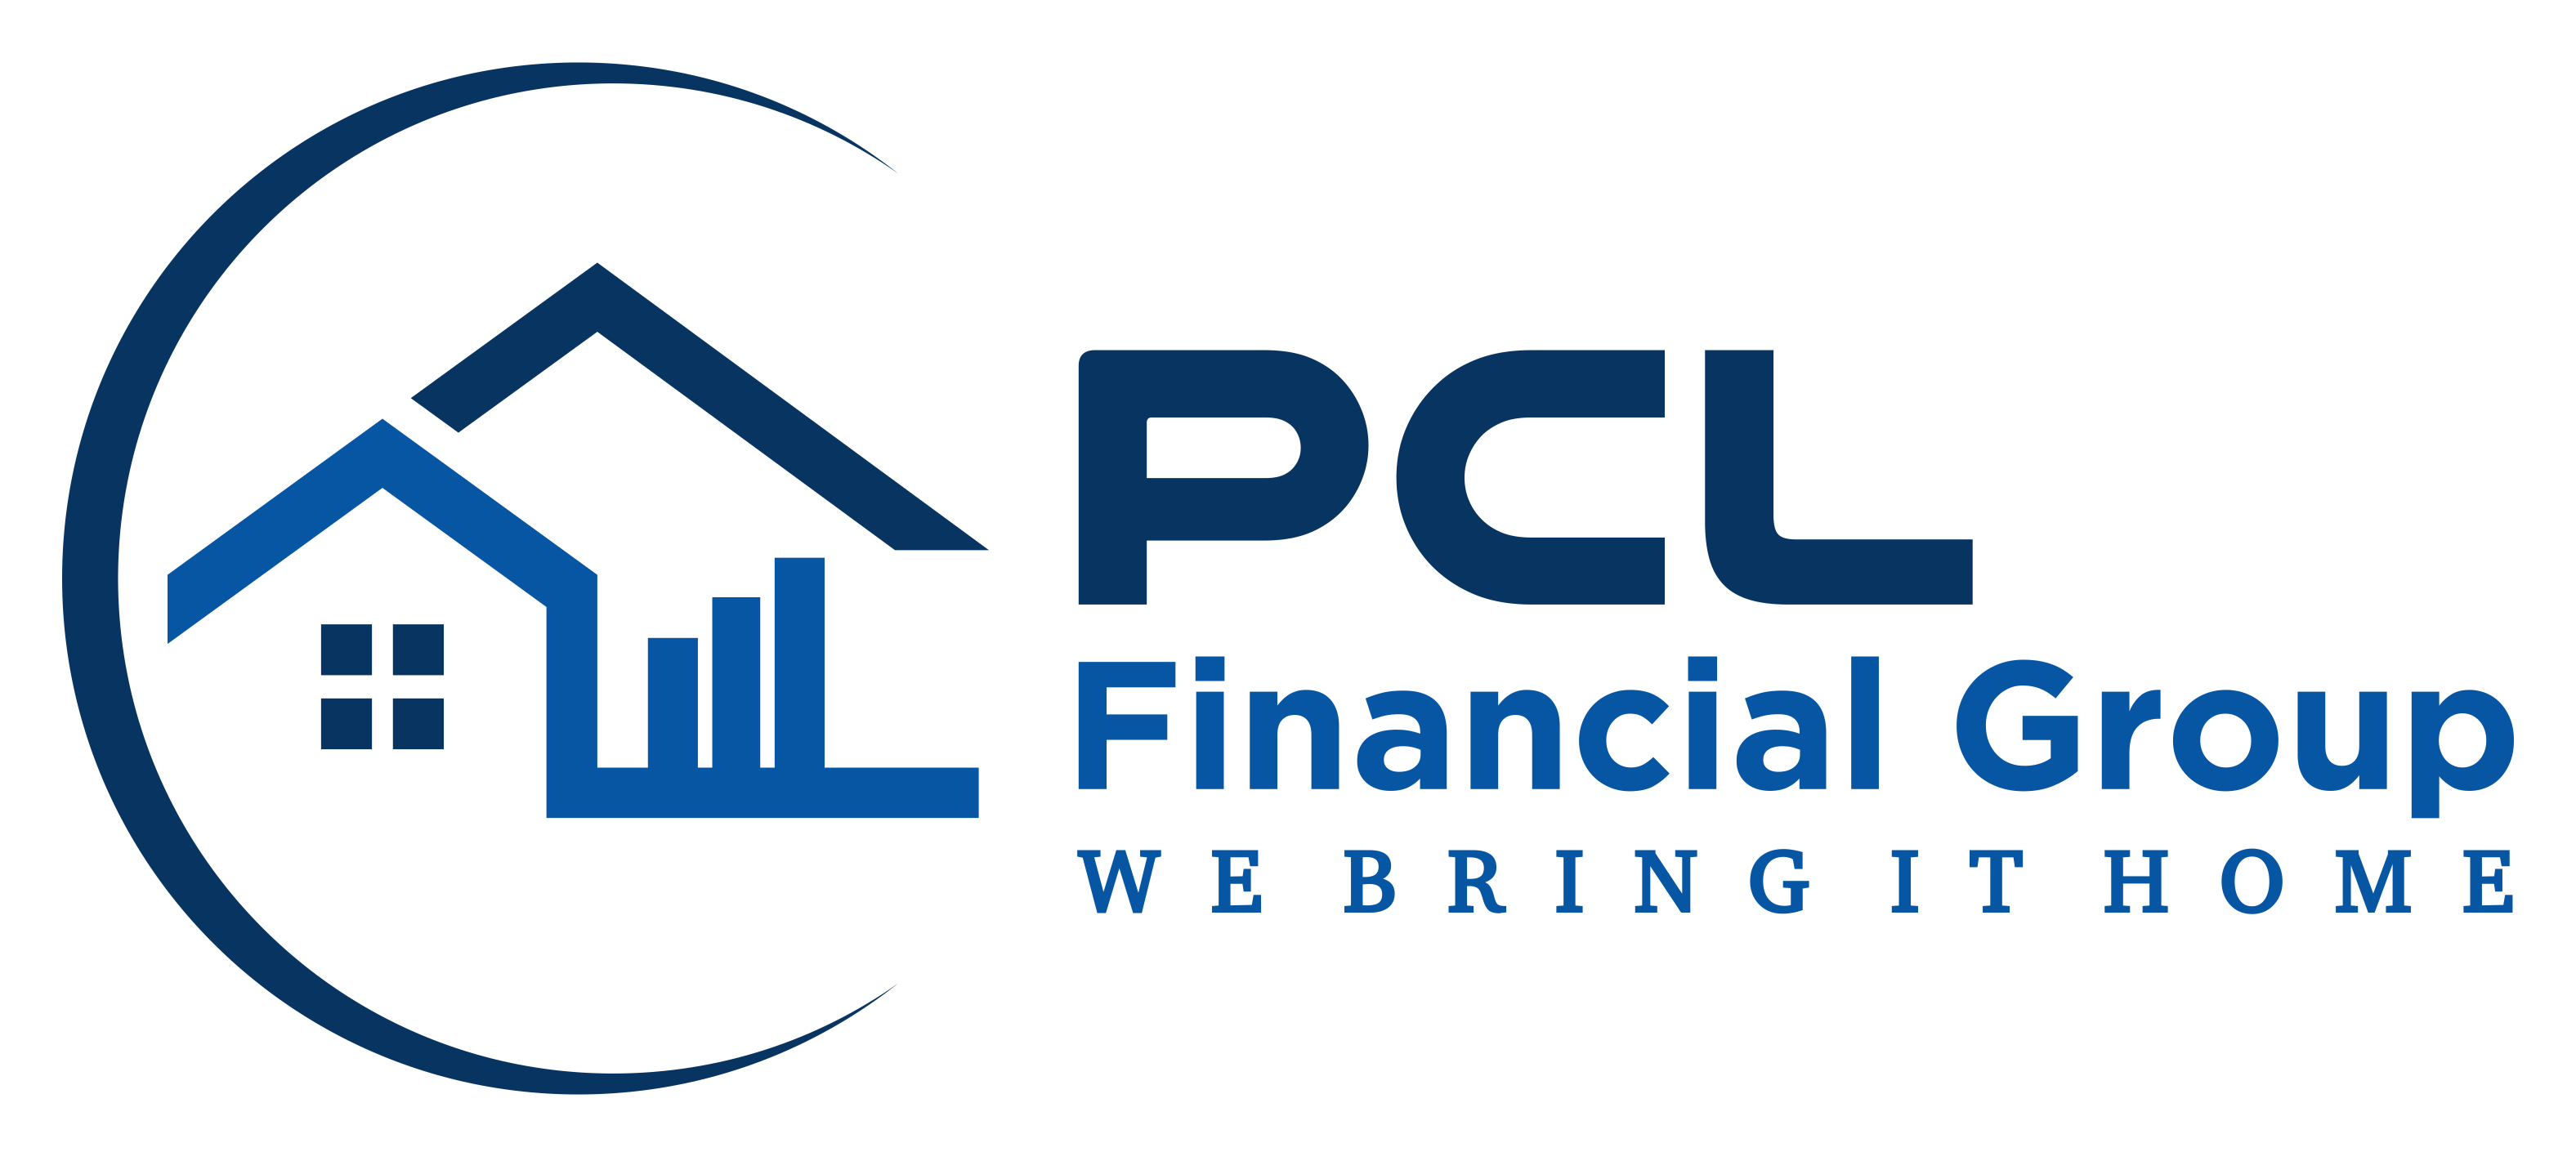 PCL Financial Group